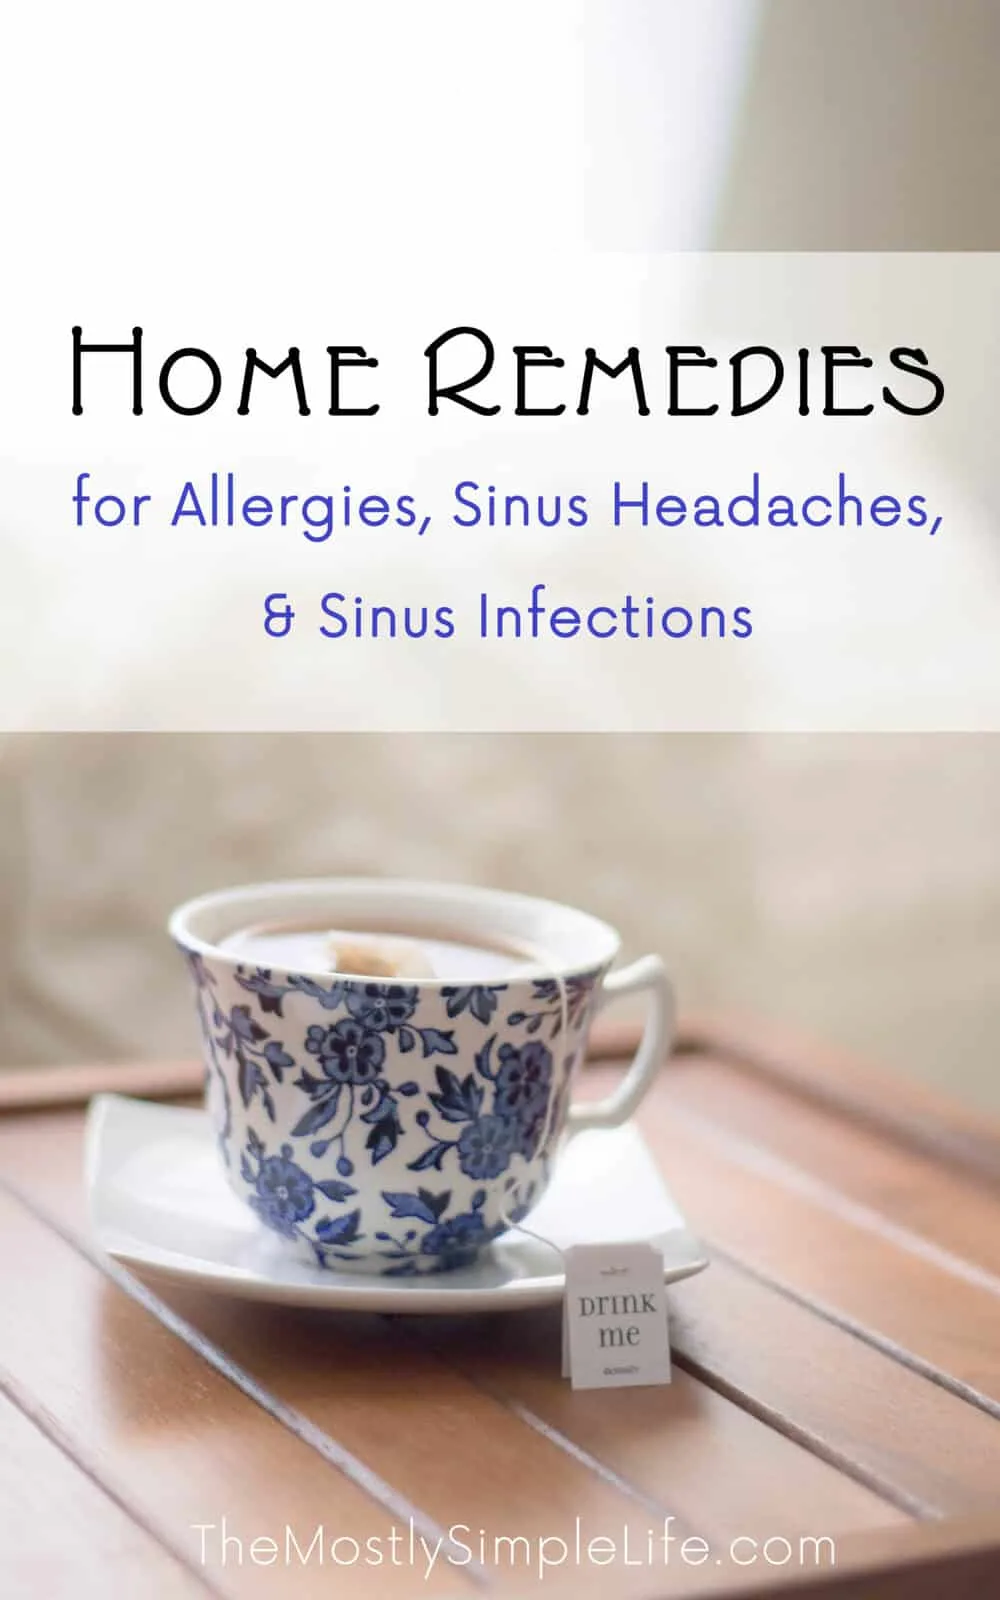 Allergy & Sinus Infection Home Remedies